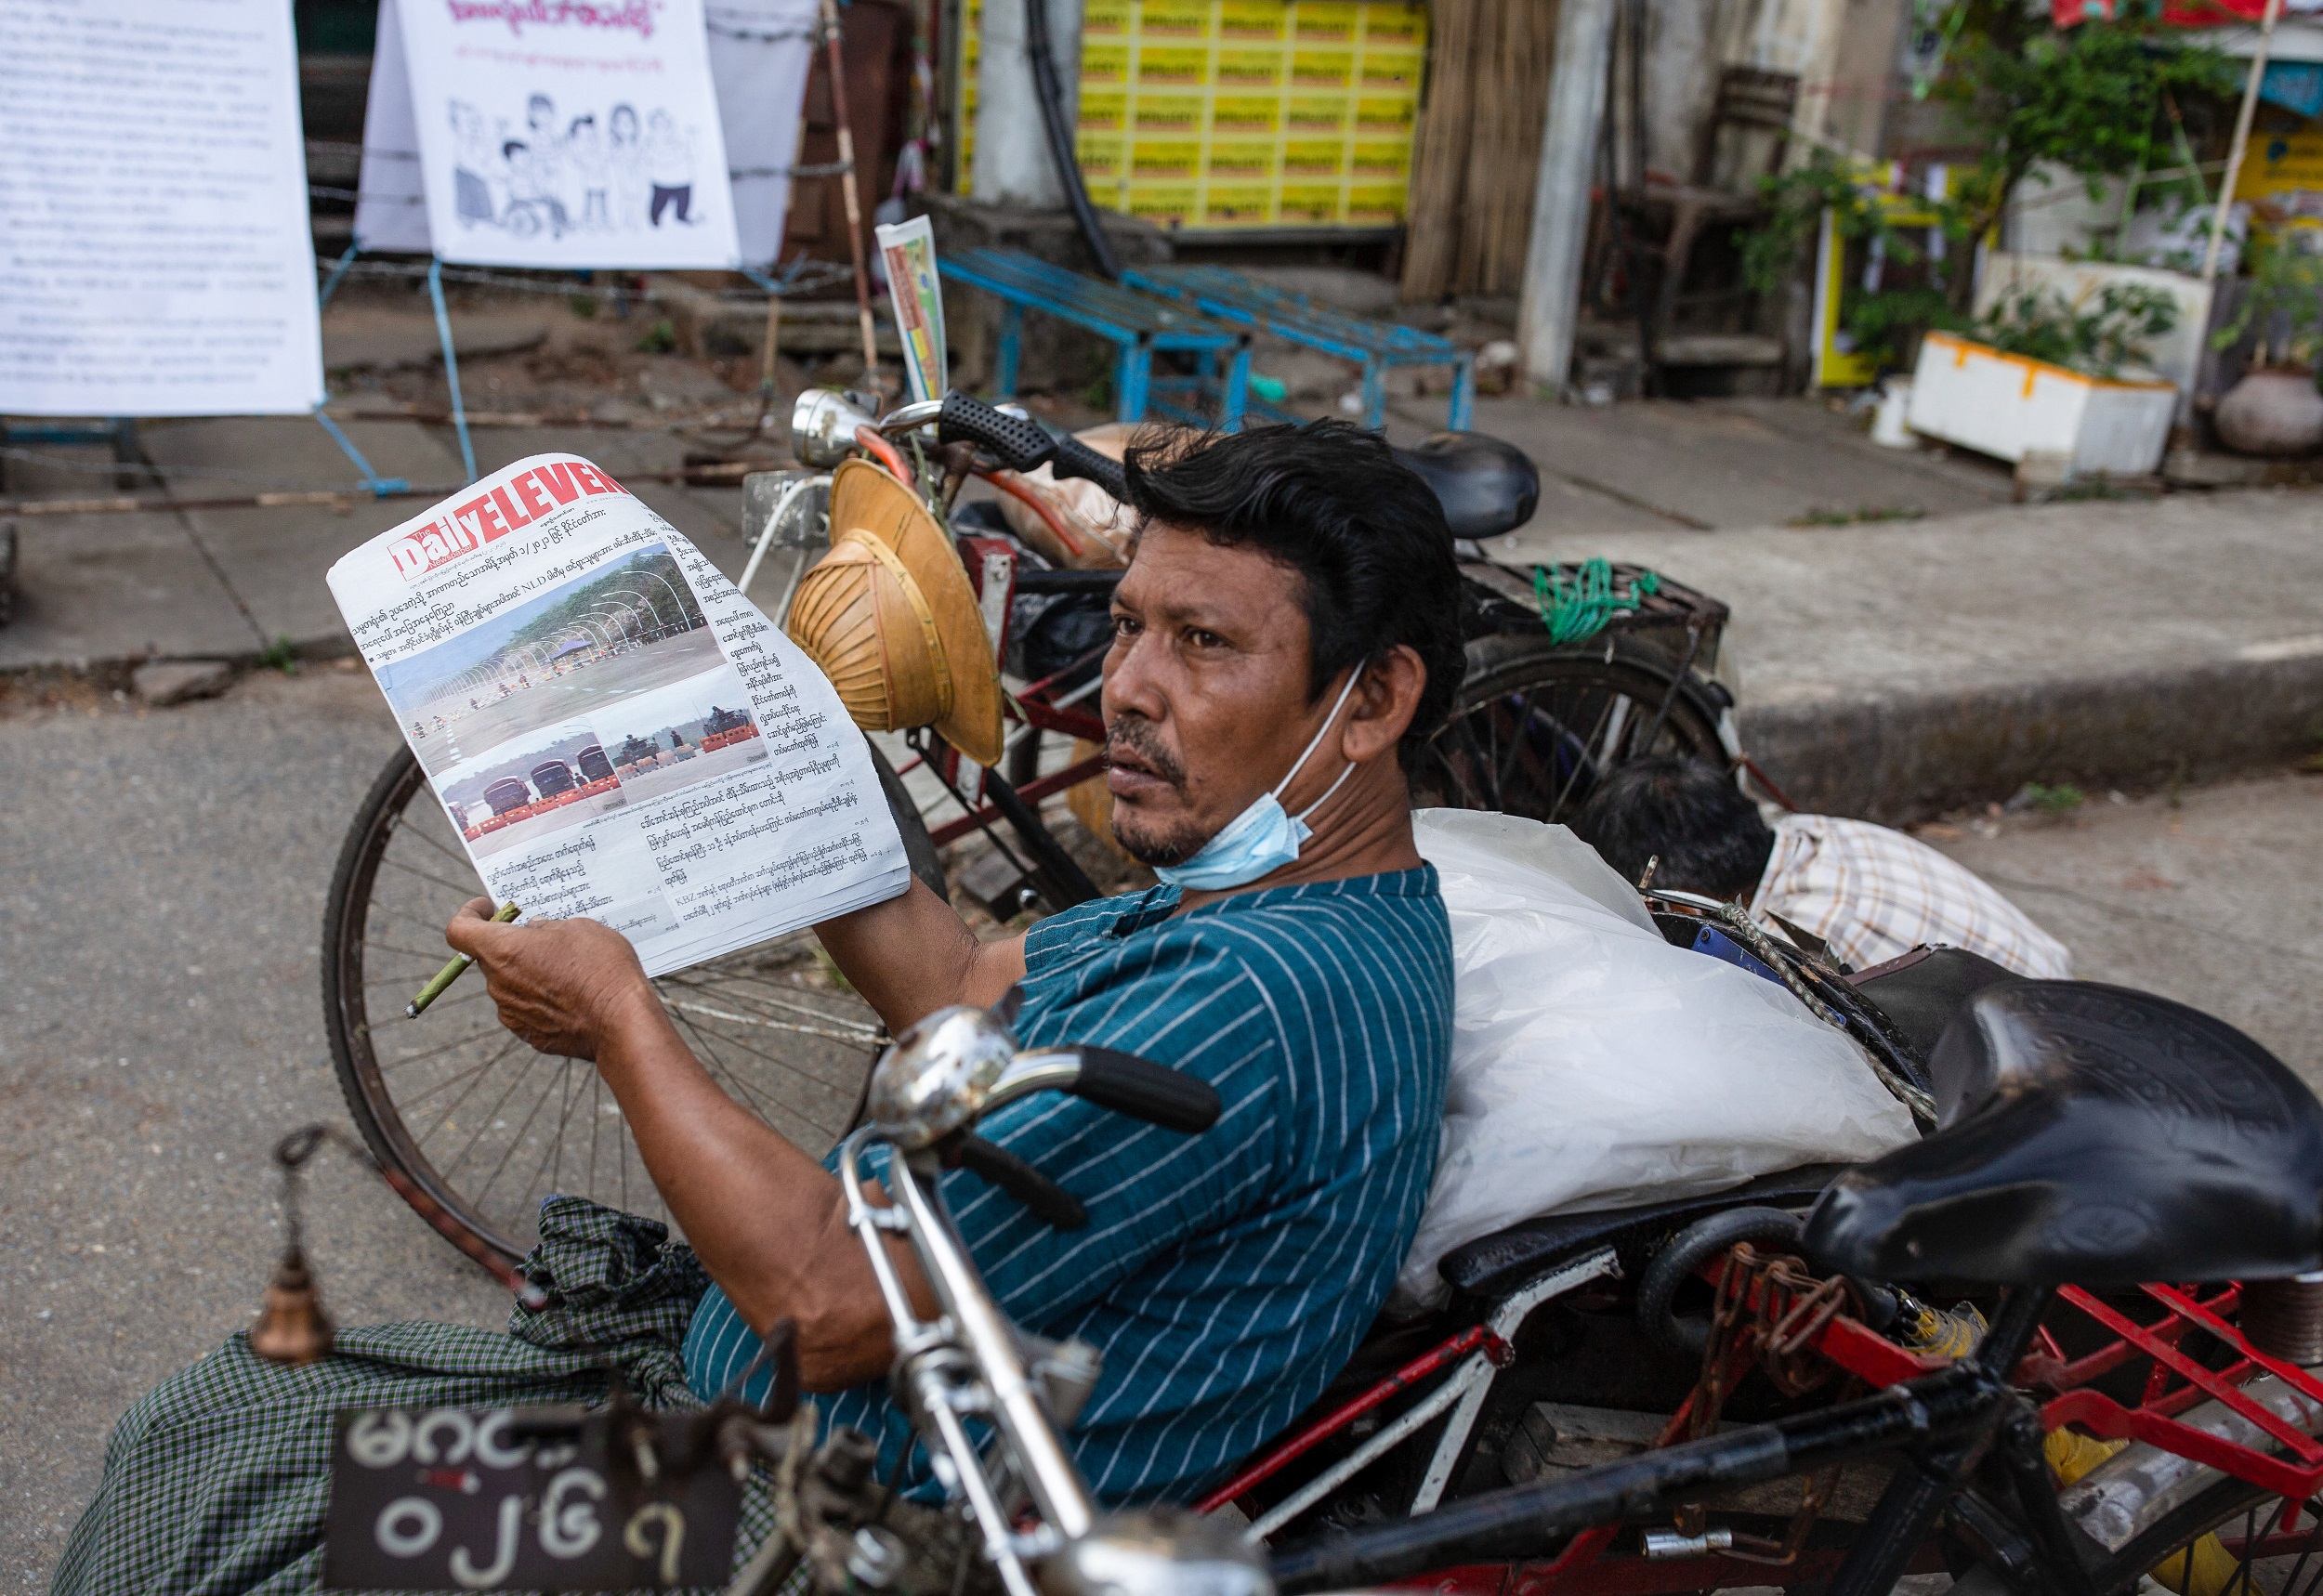 A picture of a man reading a newspaper, leaning on a motorcycle.